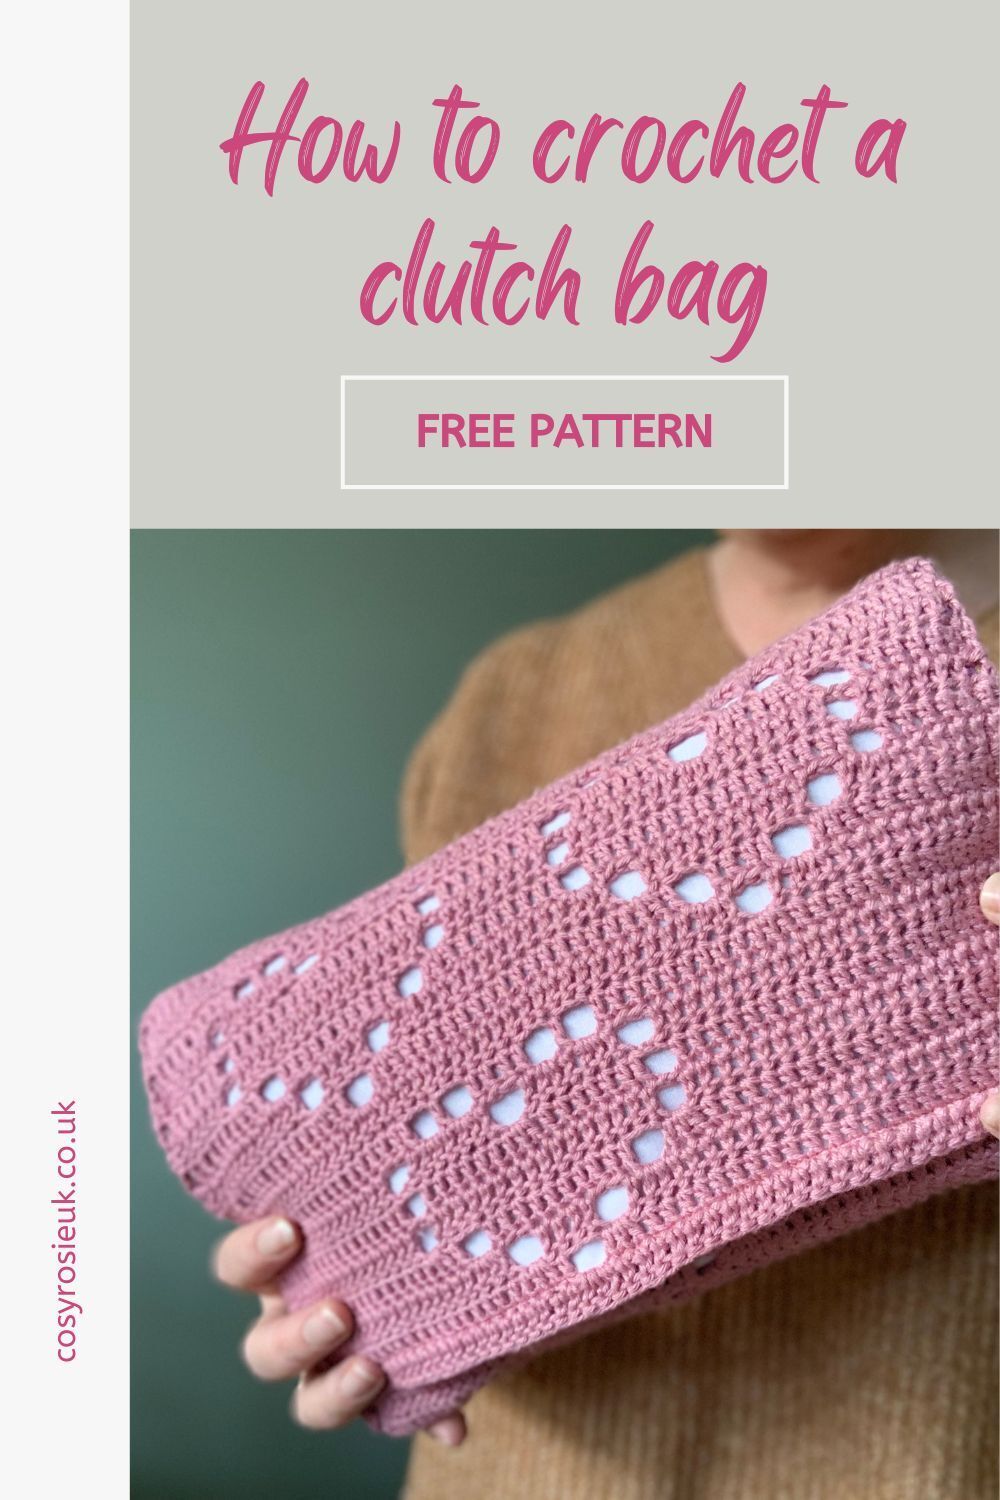 Free Crochet Clutch Bag Pattern with Lining